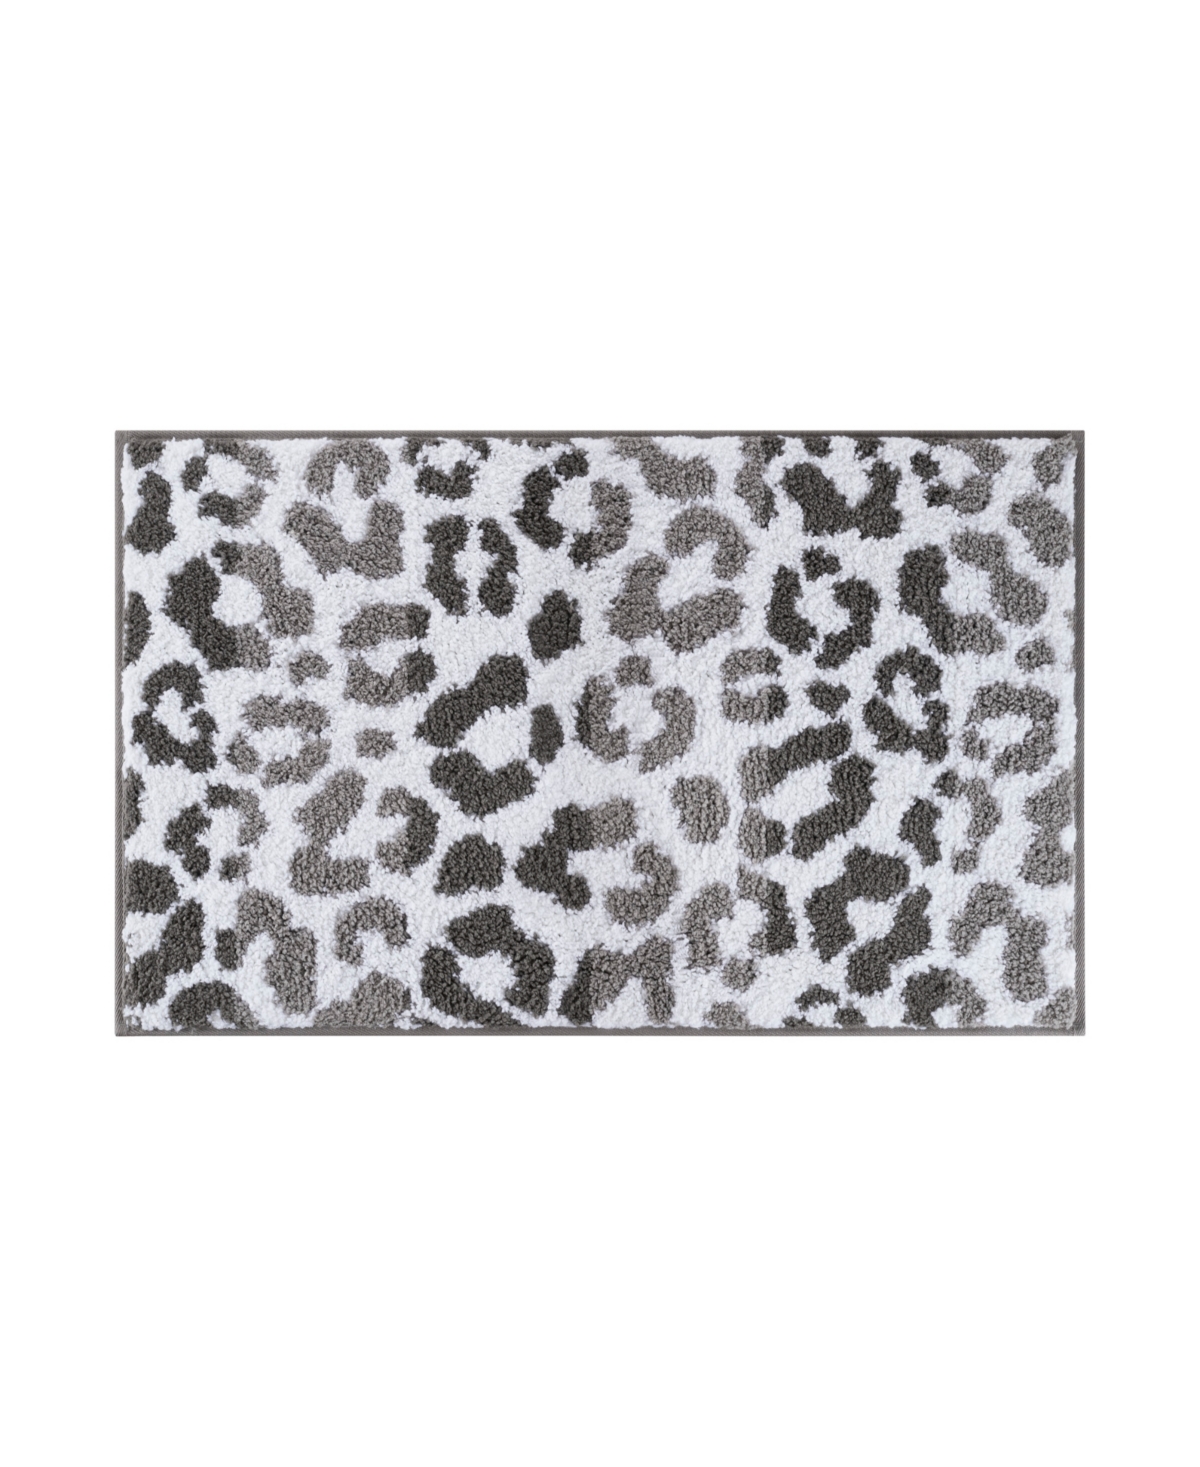 Juicy Couture Ombre Leopard 20" X 34" Bath Rug Bedding In Black/white